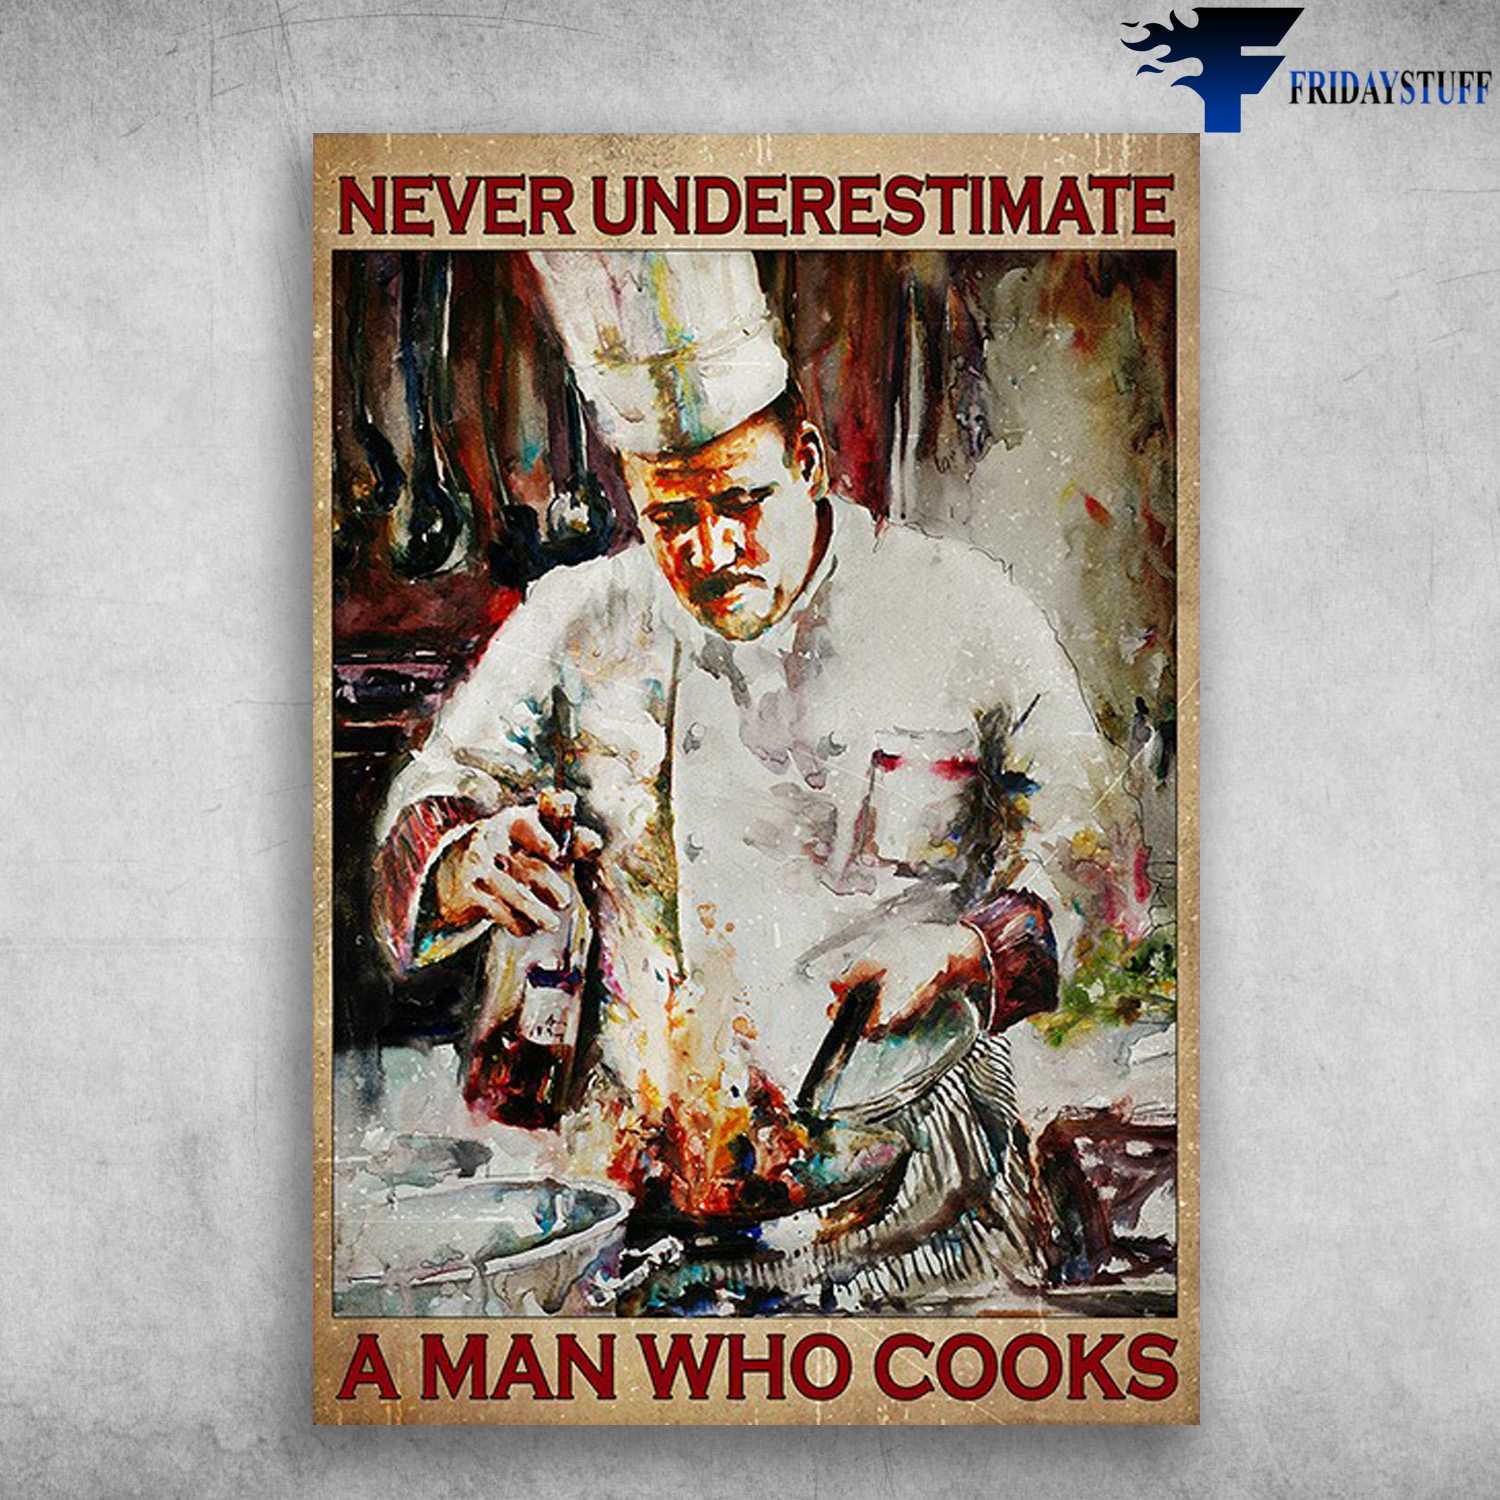 Cooking Chef - Never Underestimate, A Man Who Cooks